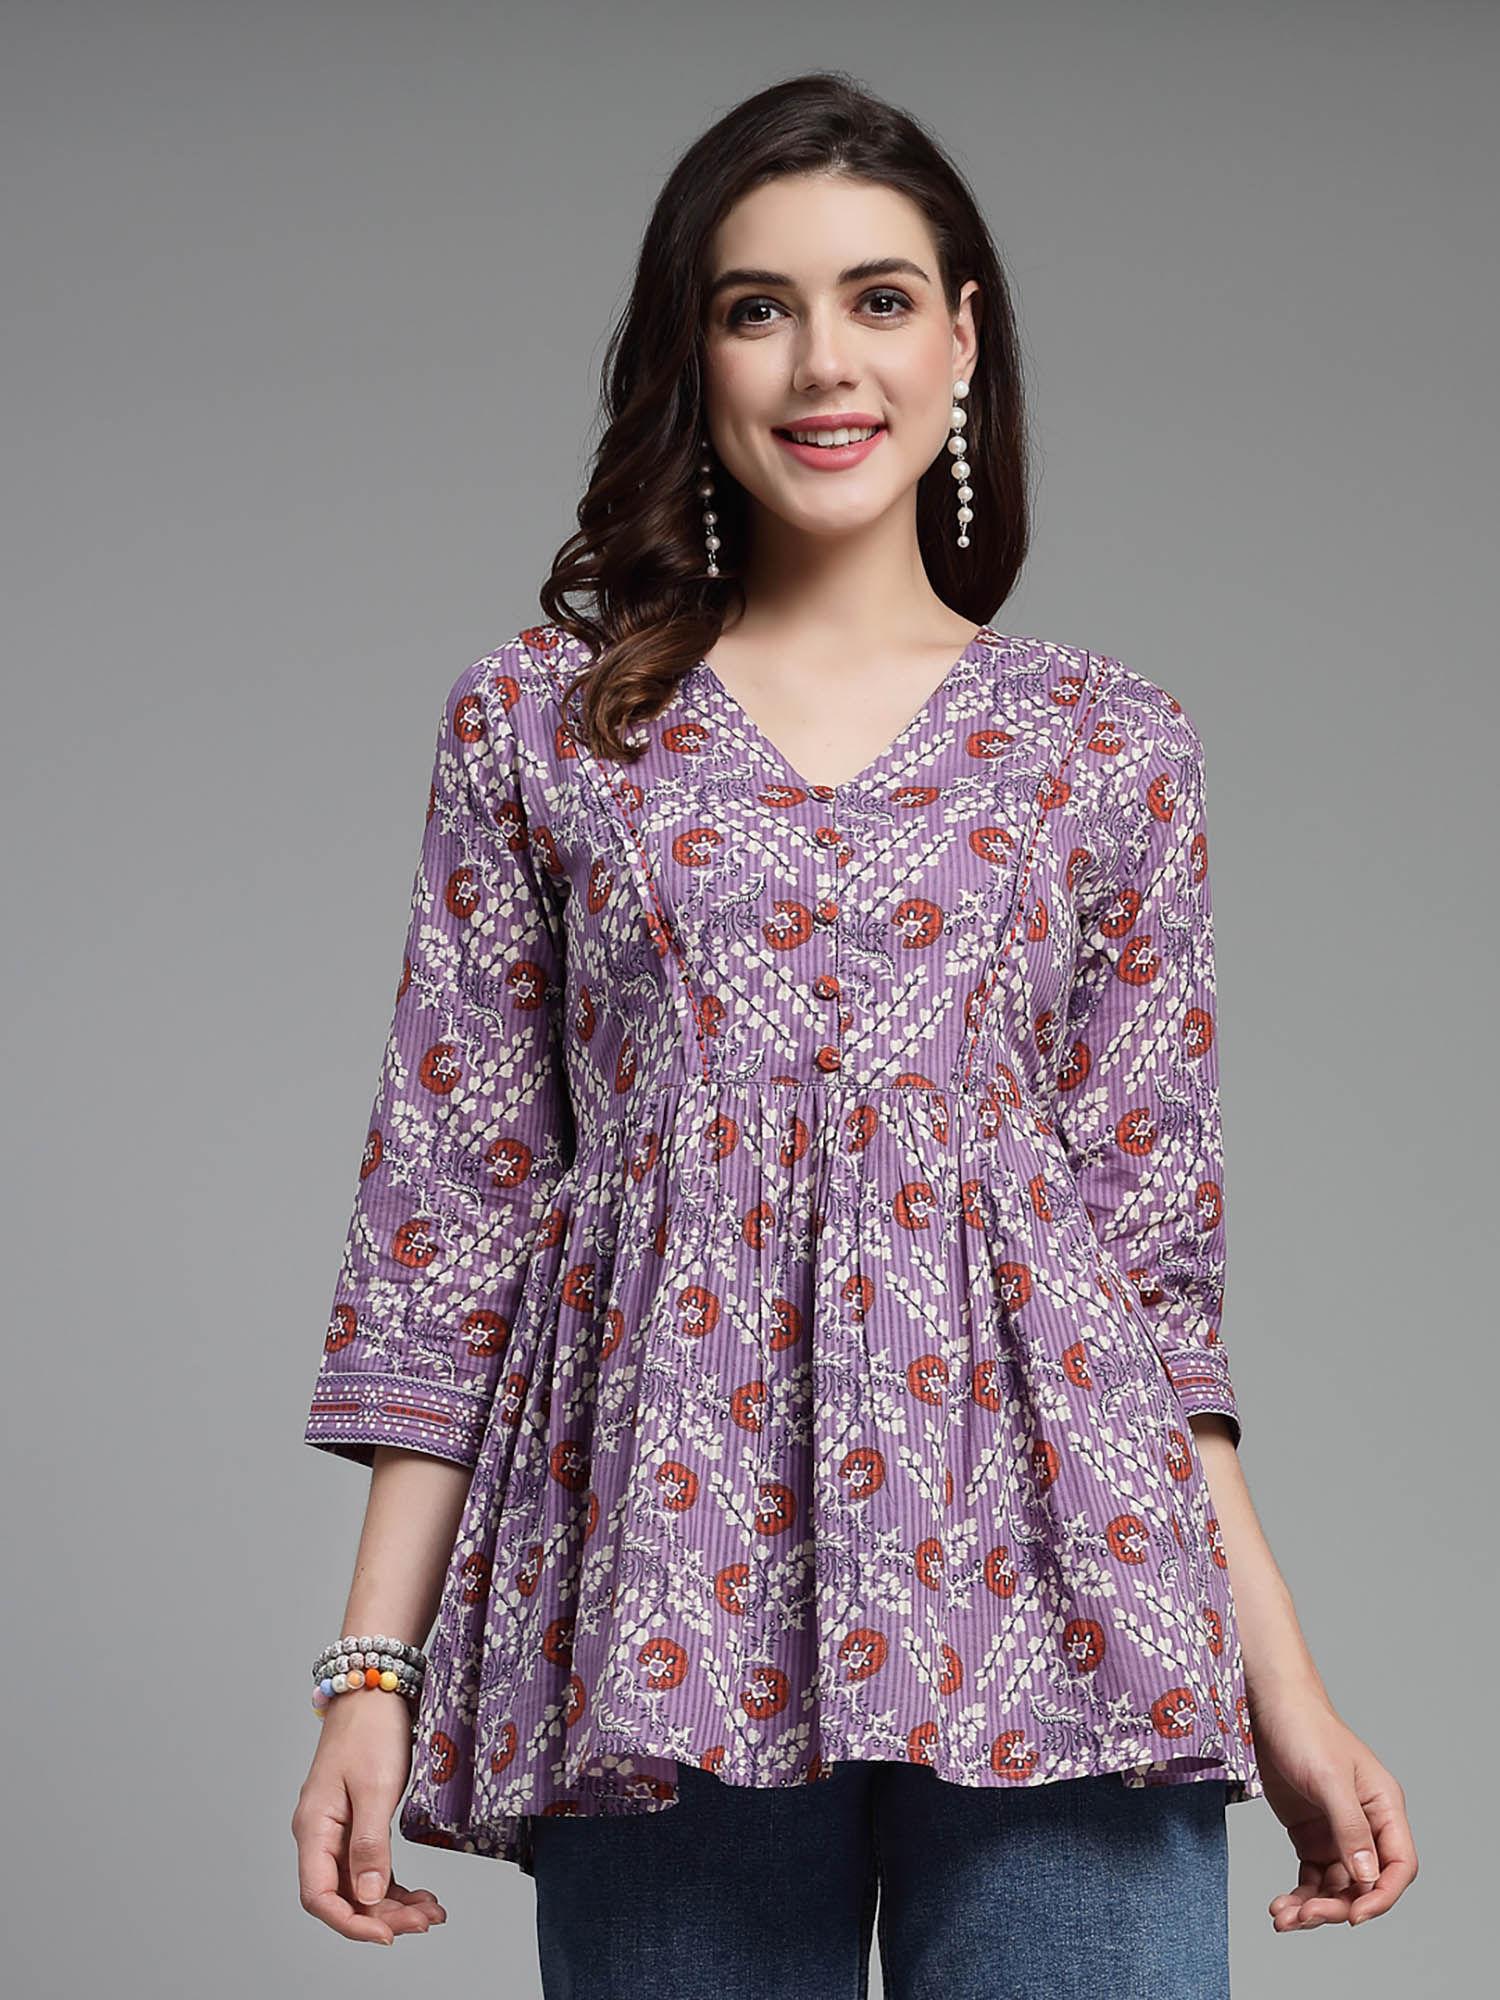 soft purple floral printed top with gathers